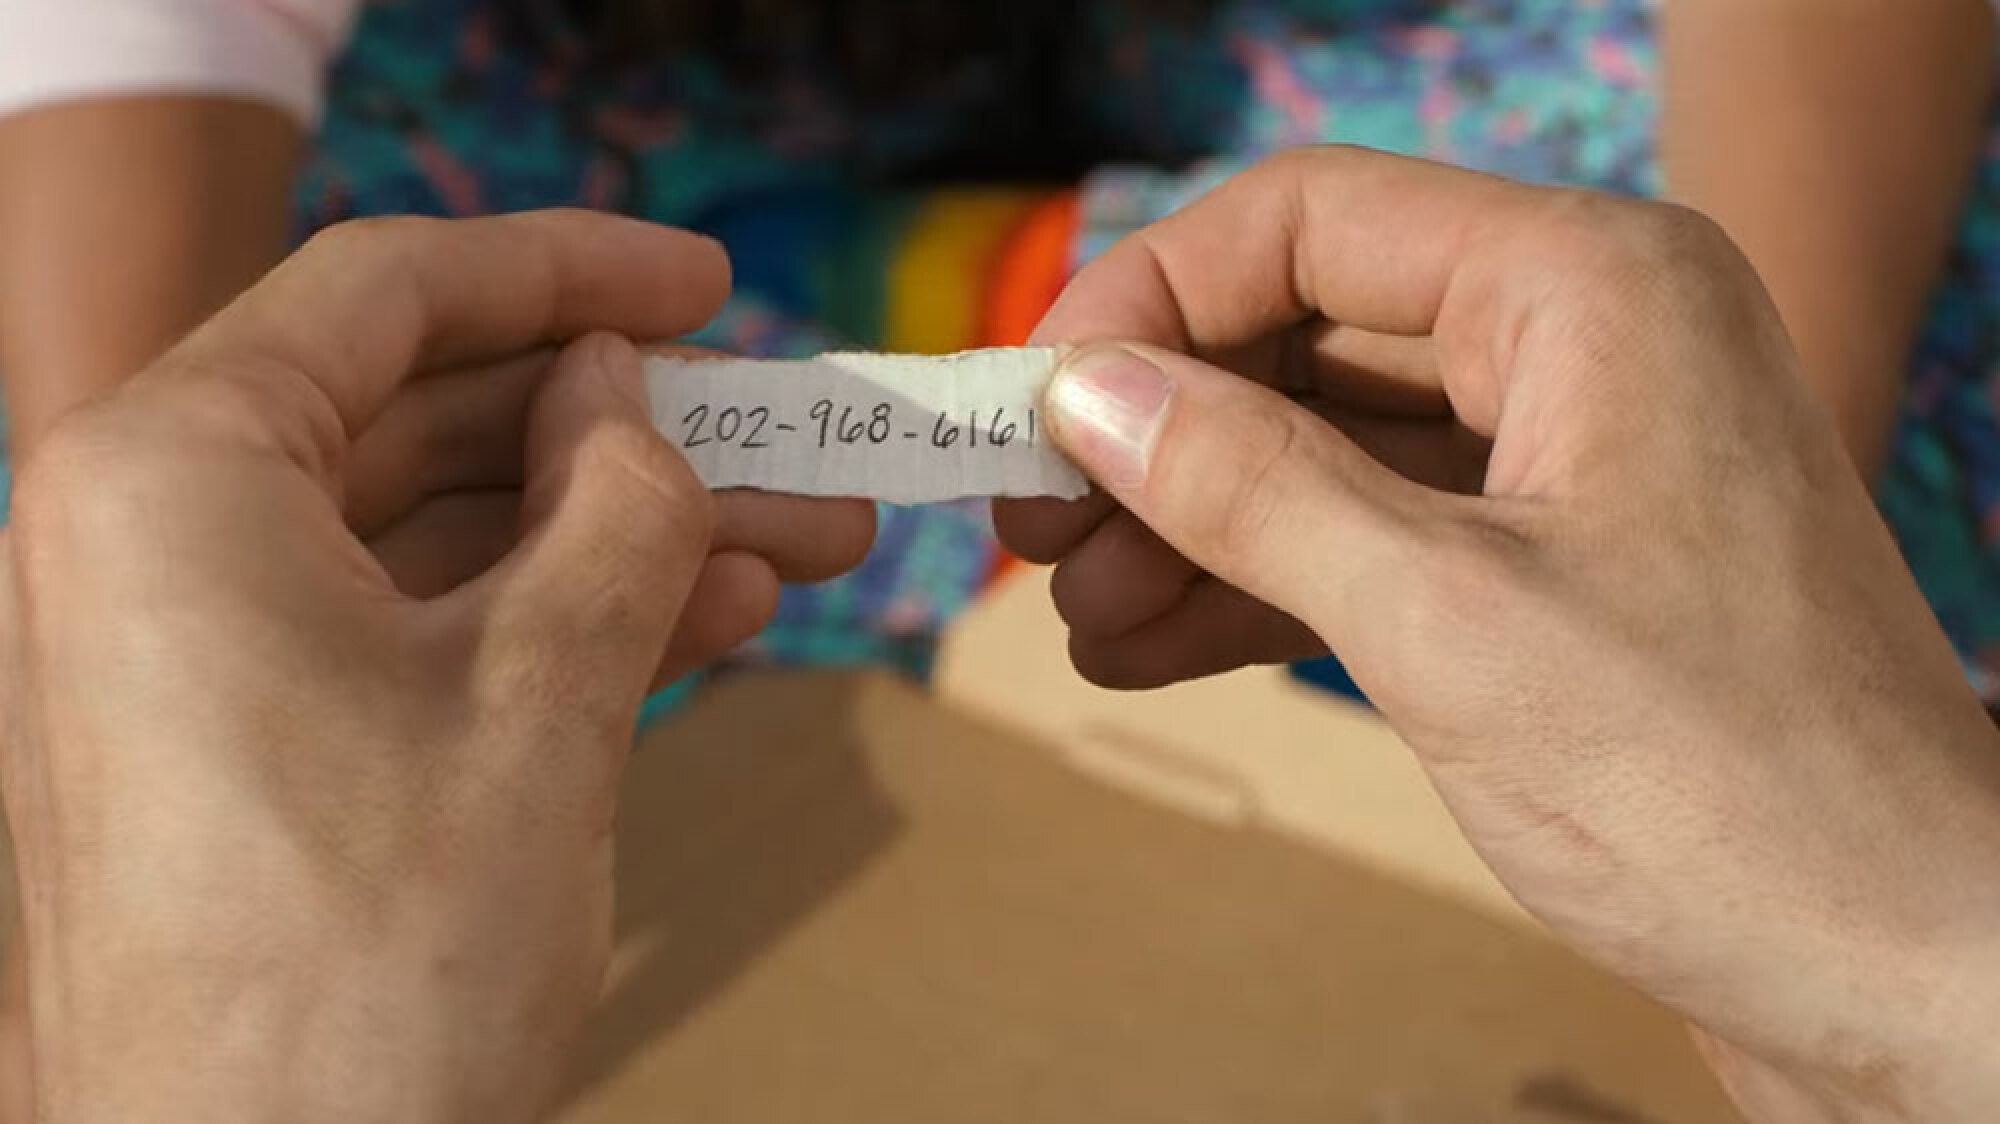 A person holds a slip of paper that shows a phone number.